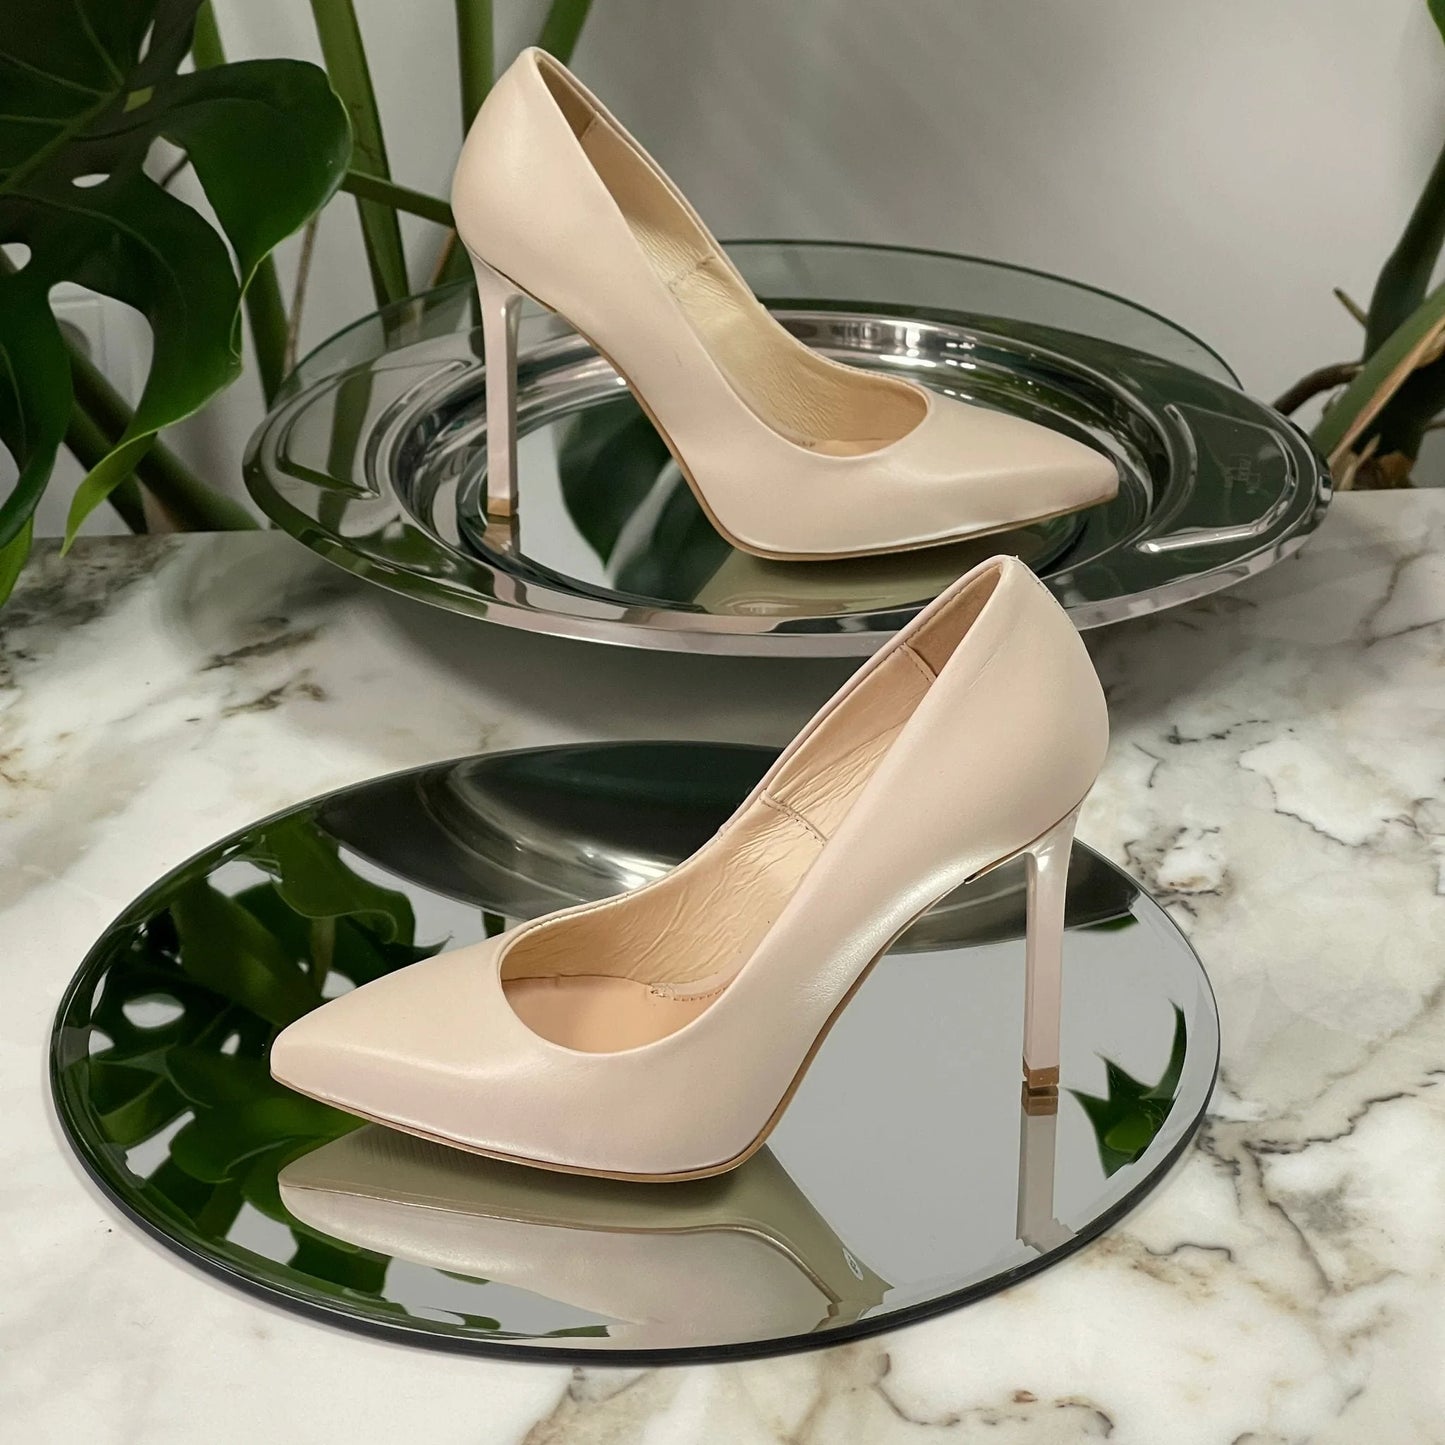 Pointed toe nude leather petite court shoes